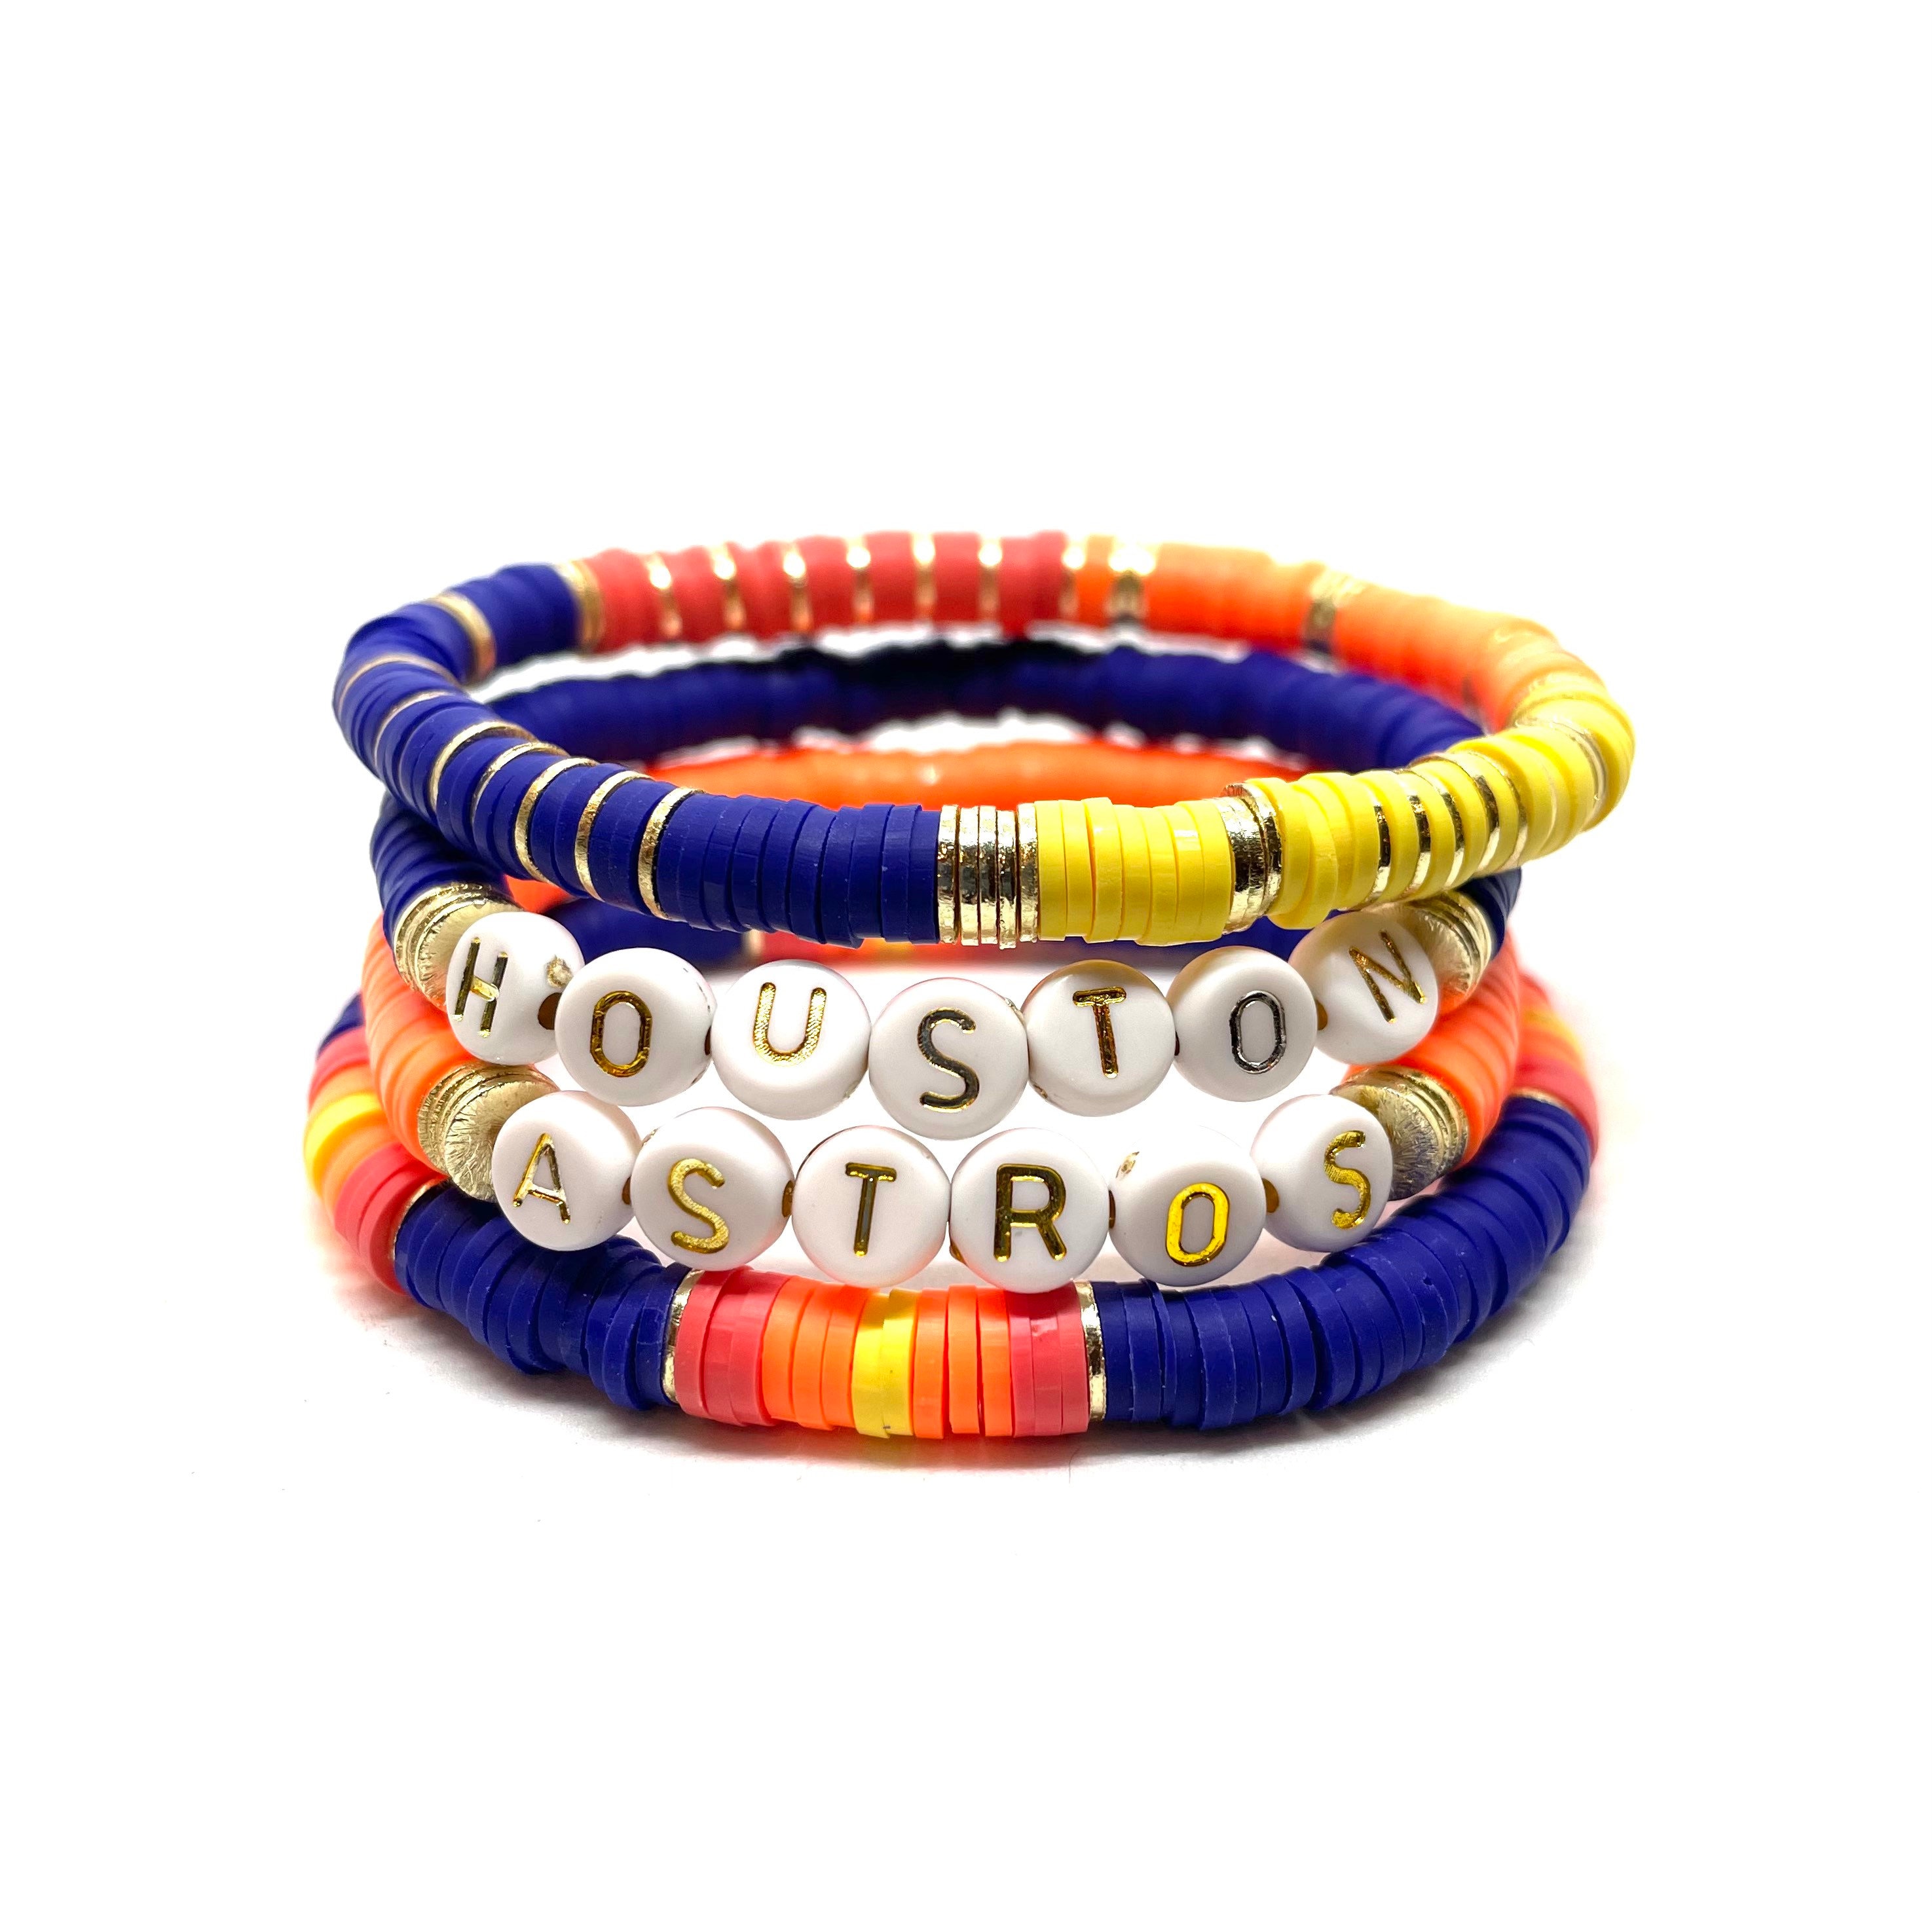 Astros Heishi Clay Stack Bracelet with Gold/6Mm Stack Soft African Astros Vinyl Bracelets/Heishi Vinyl Bracelets/HOUSTON Astros